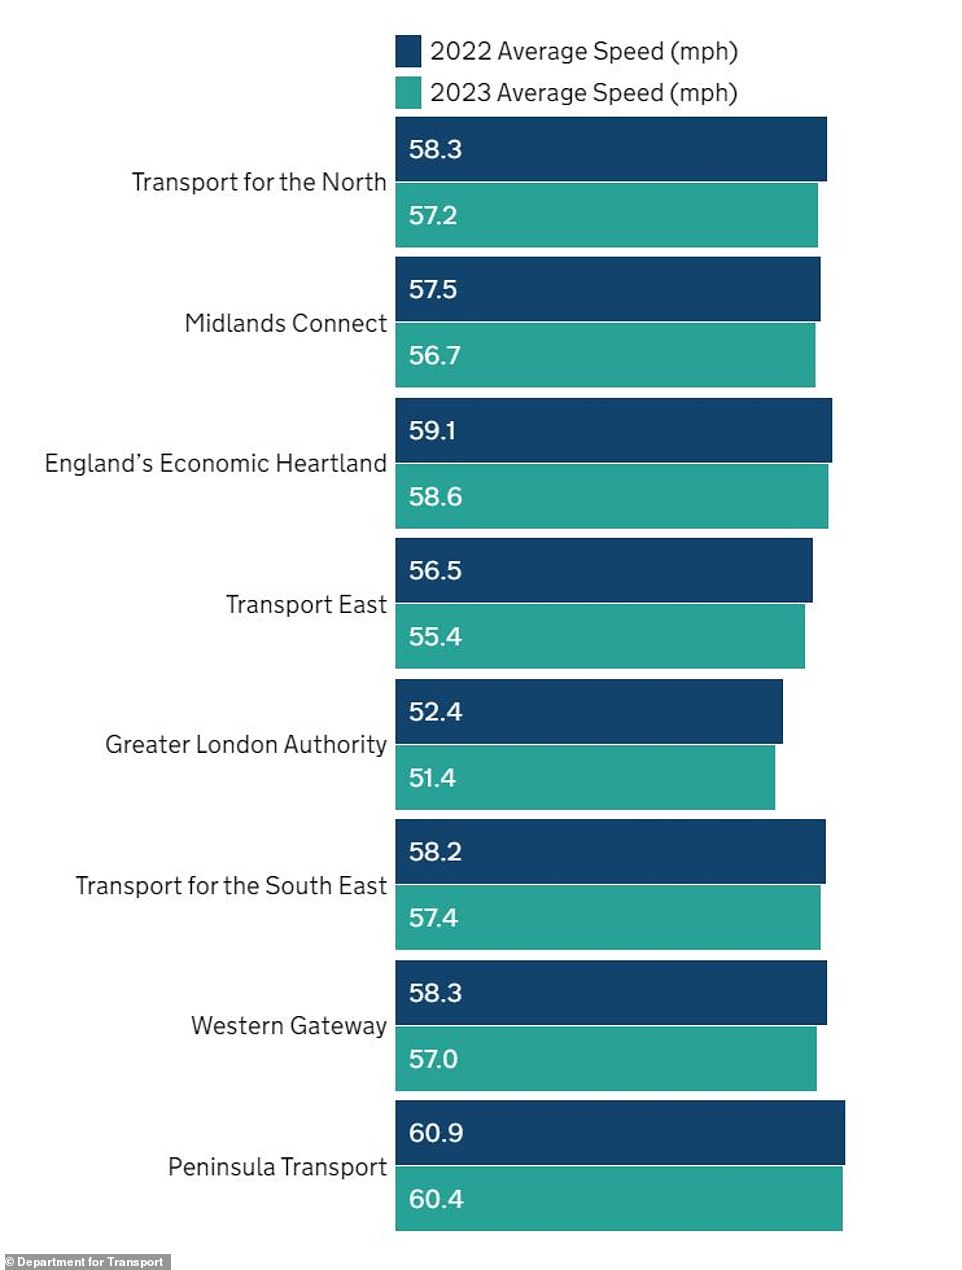 The DfT report also showed what the average speed was on motorways and A roads in each region of the UK.